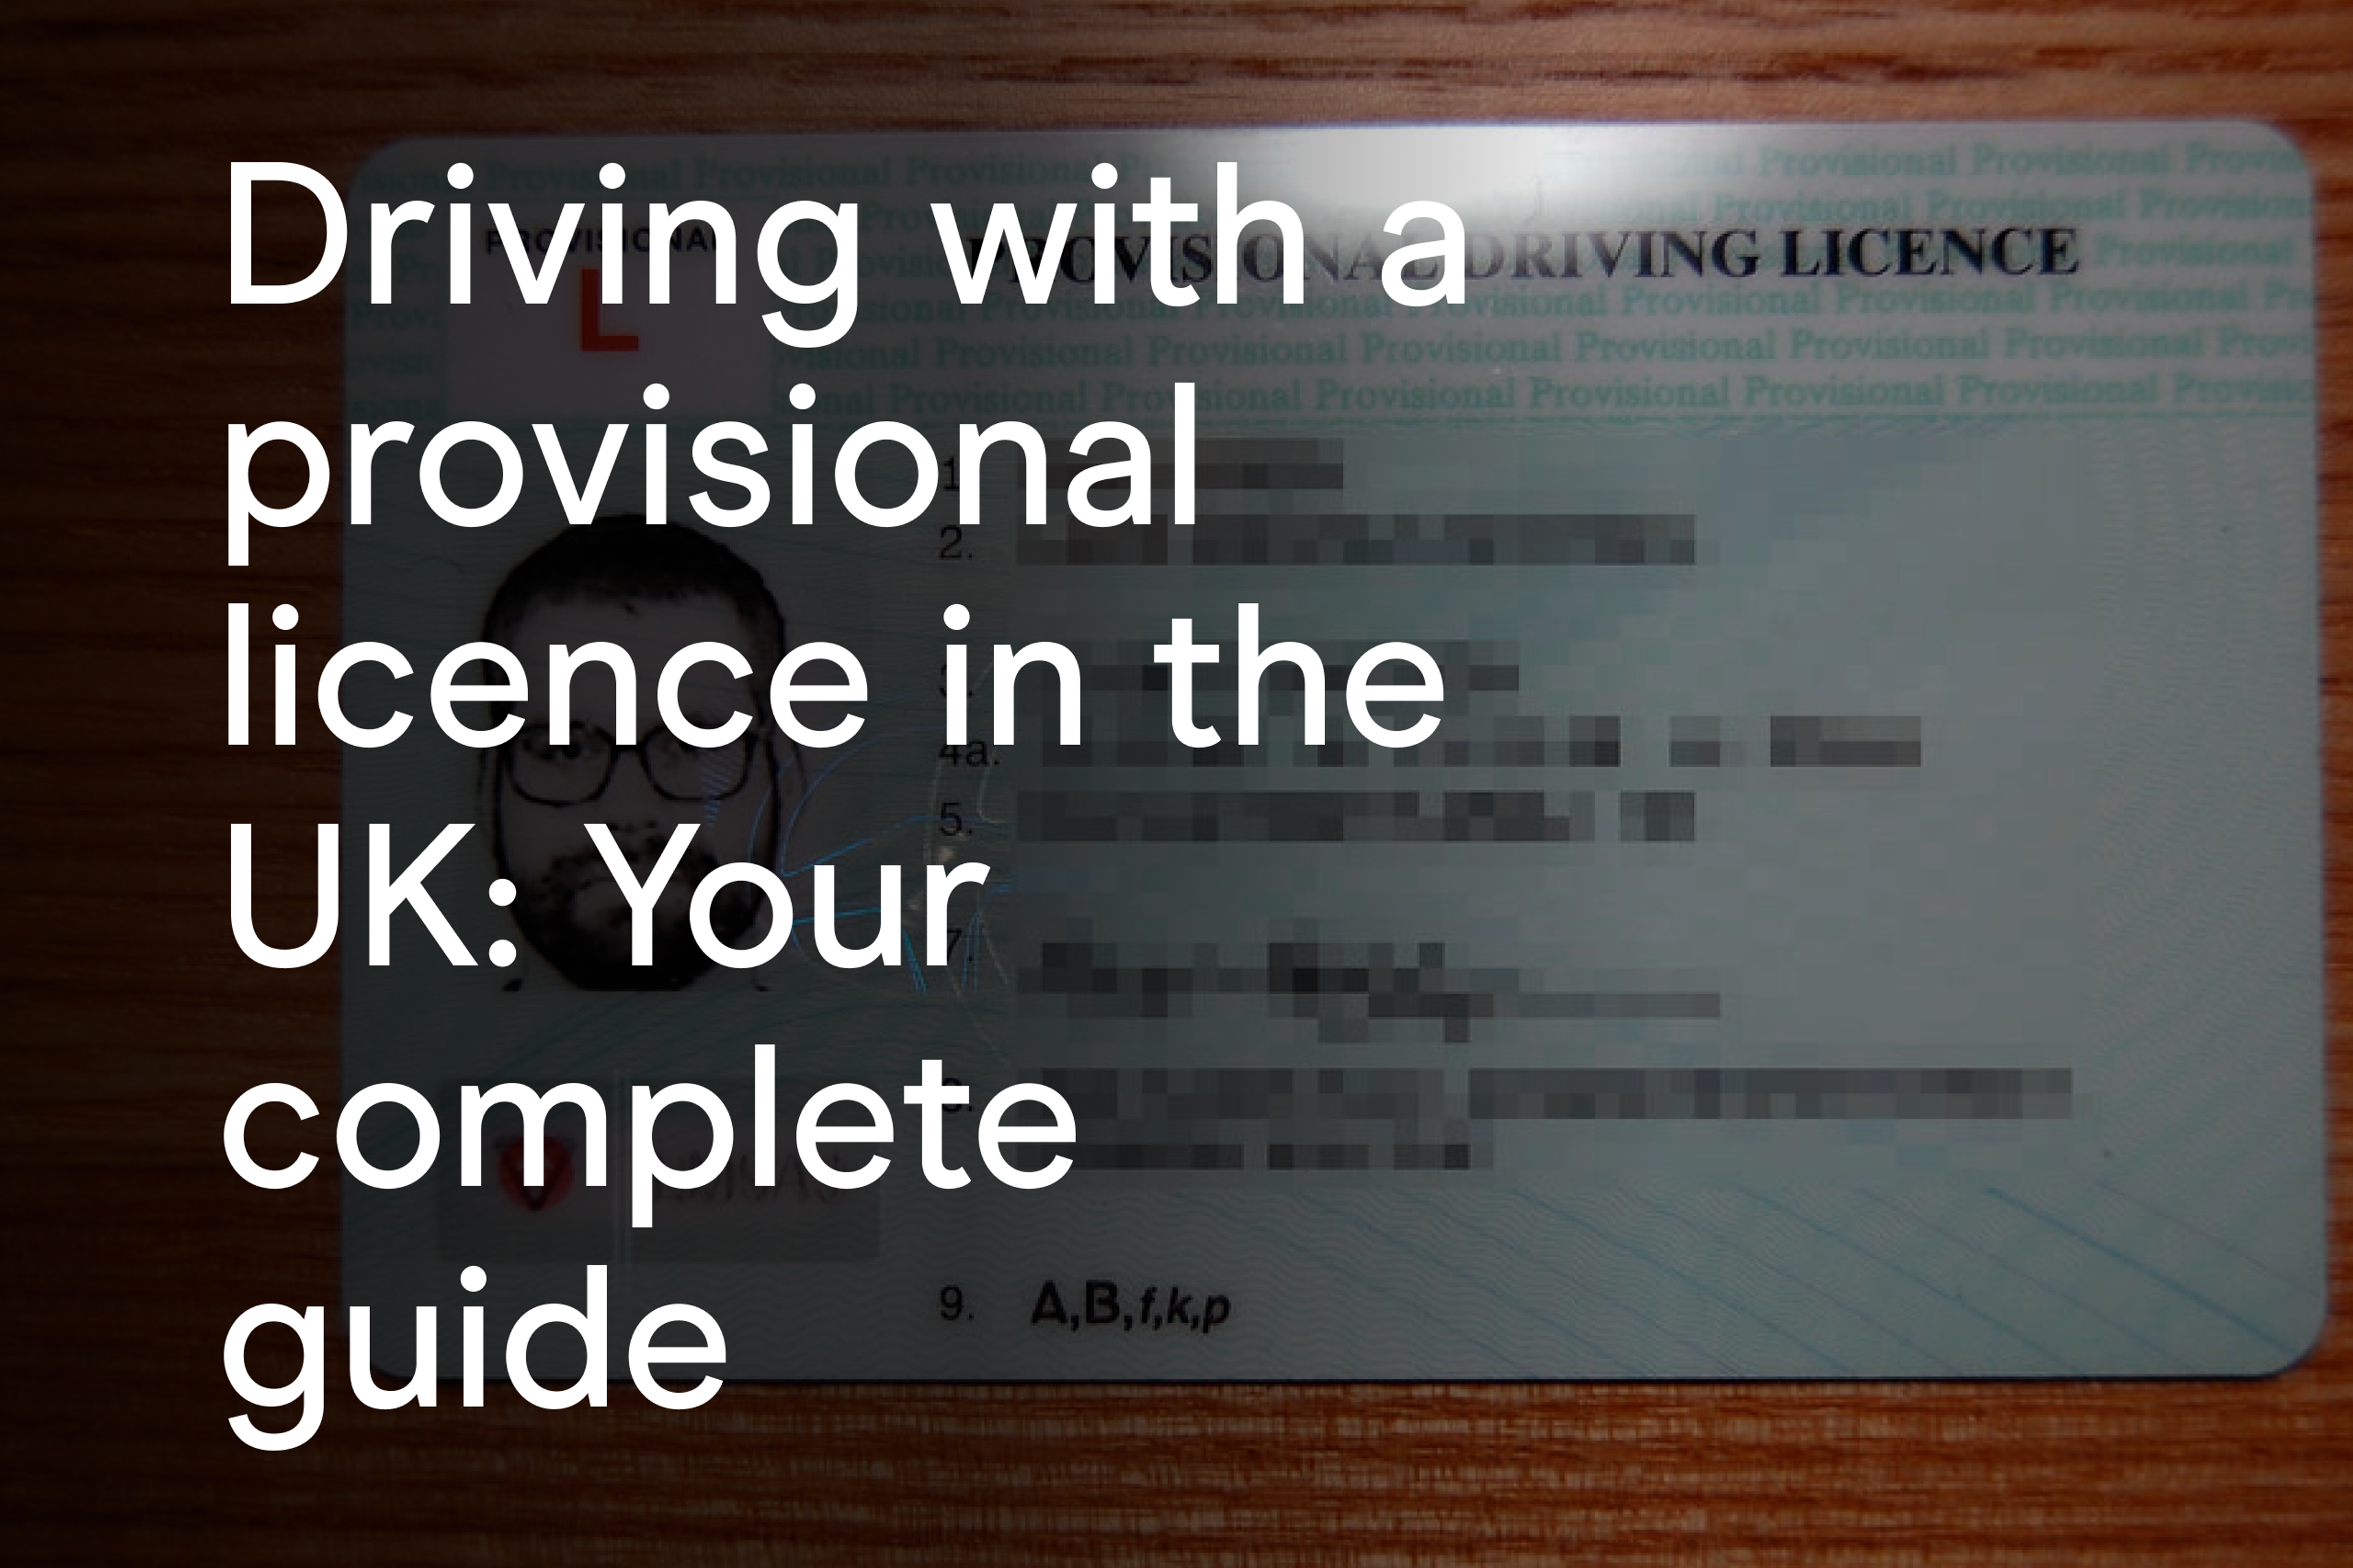 Driving with a provisional licence in the UK: Your complete guide